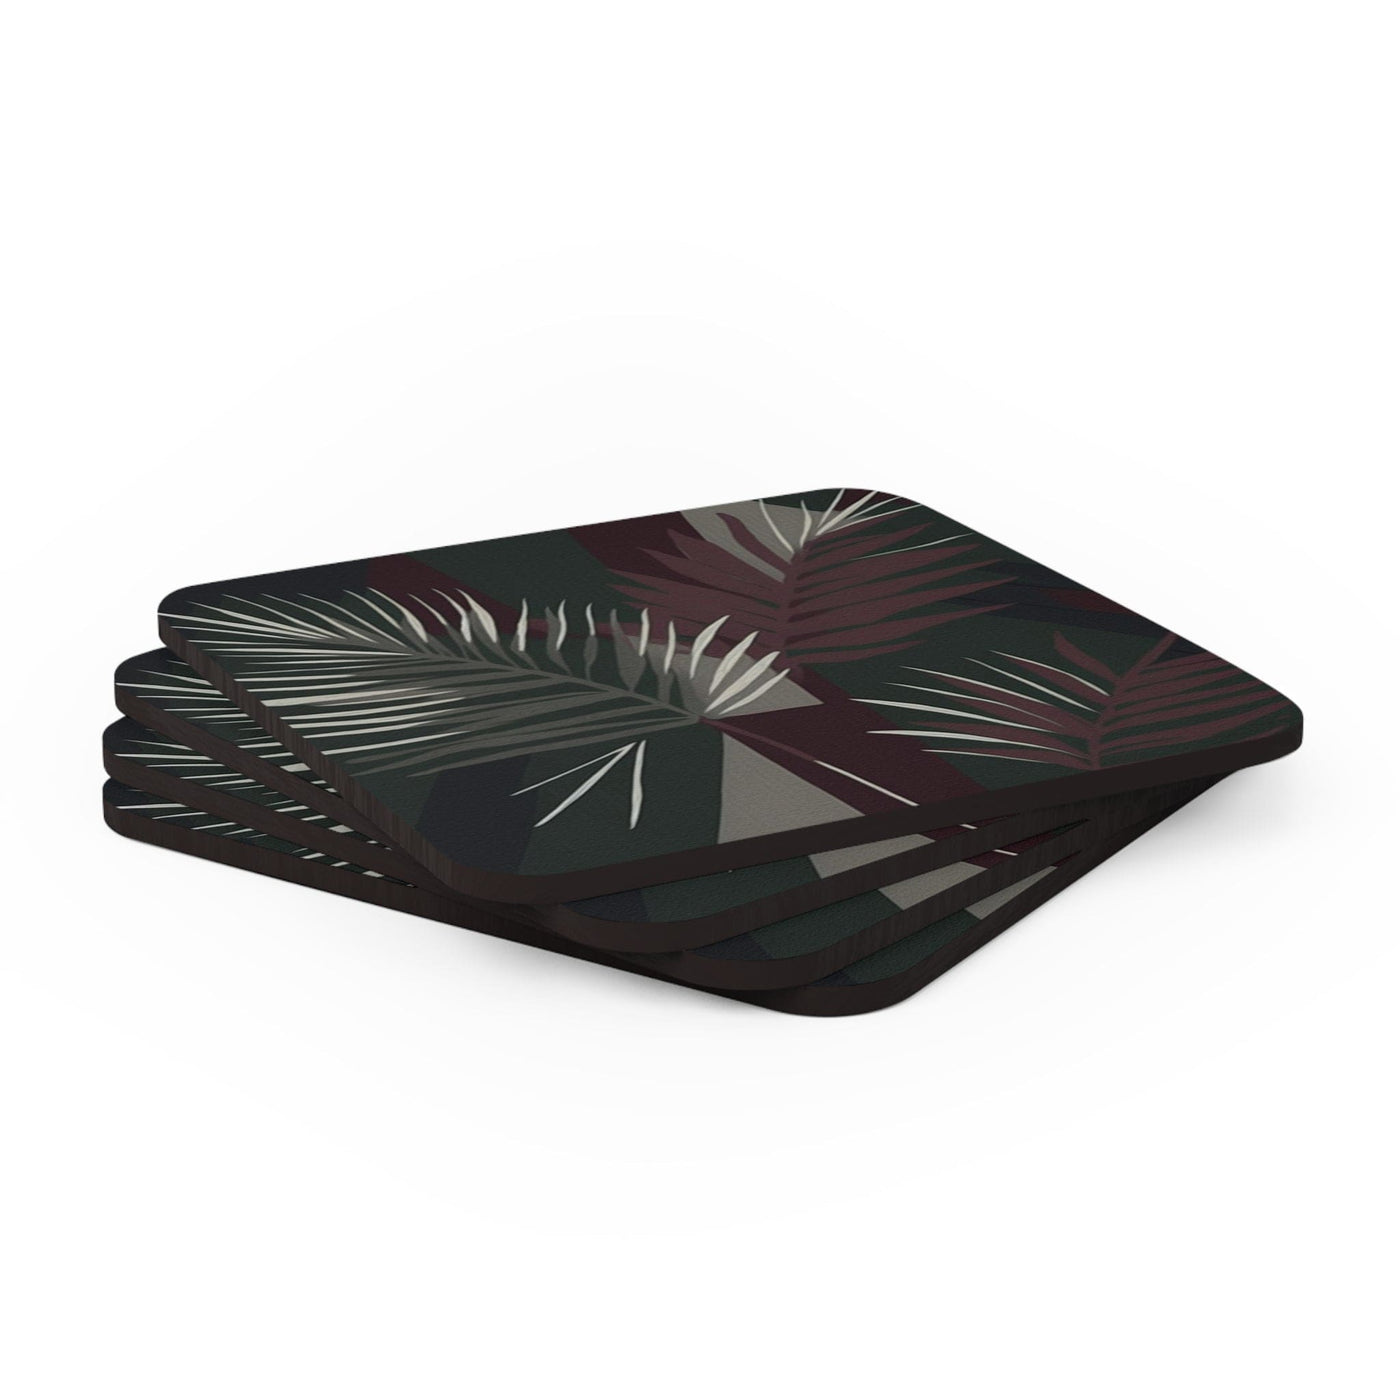 Coaster Set Of 4 For Drinks Palm Tree Leaves Maroon Green Background Minimalist